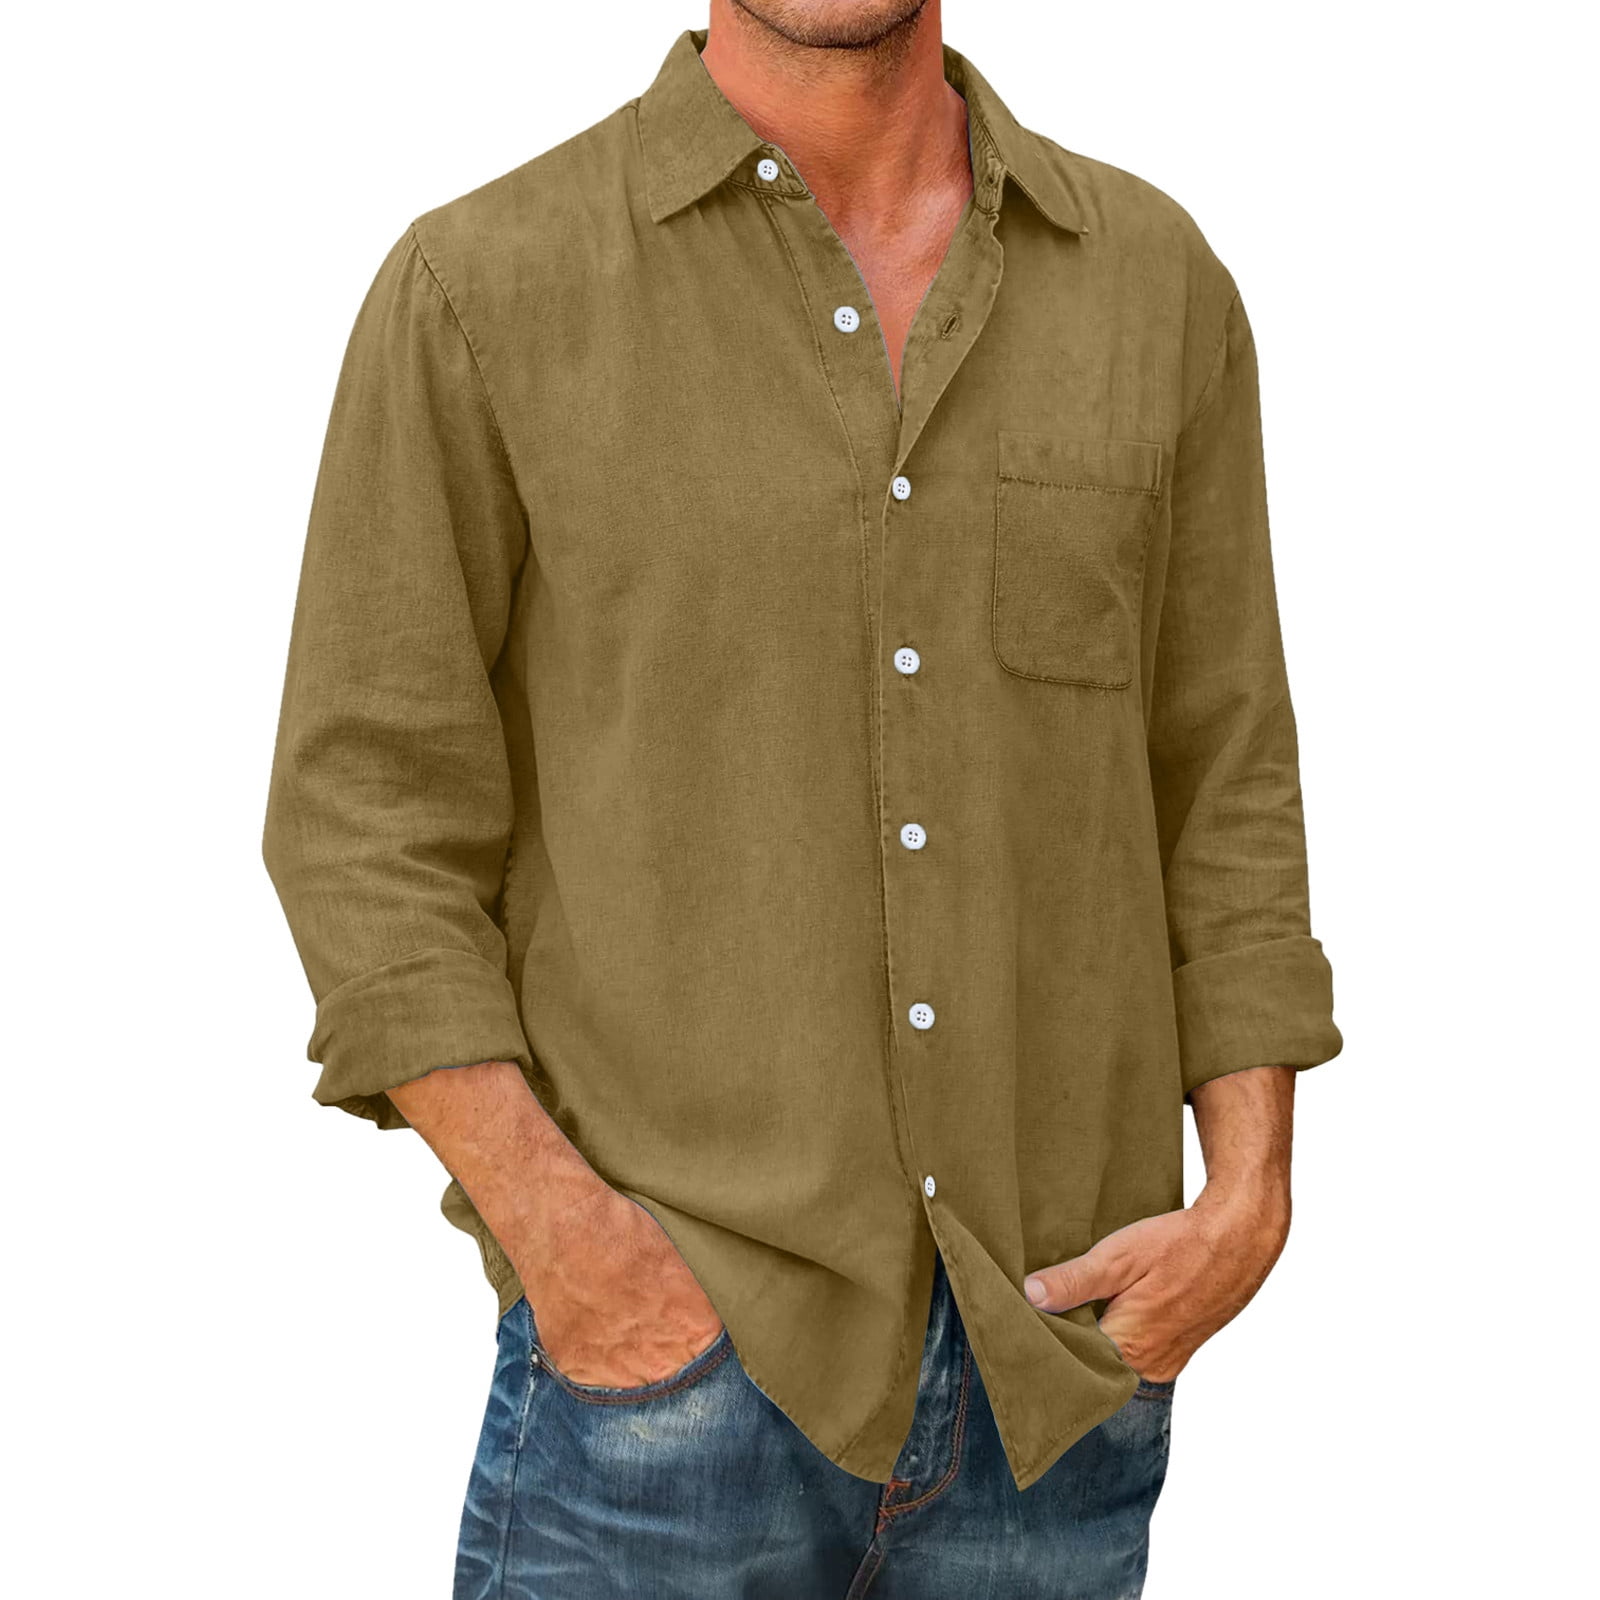 Male Casual Autumn Solid Cotton Pocket Shirt Turn Down Collar Button ...